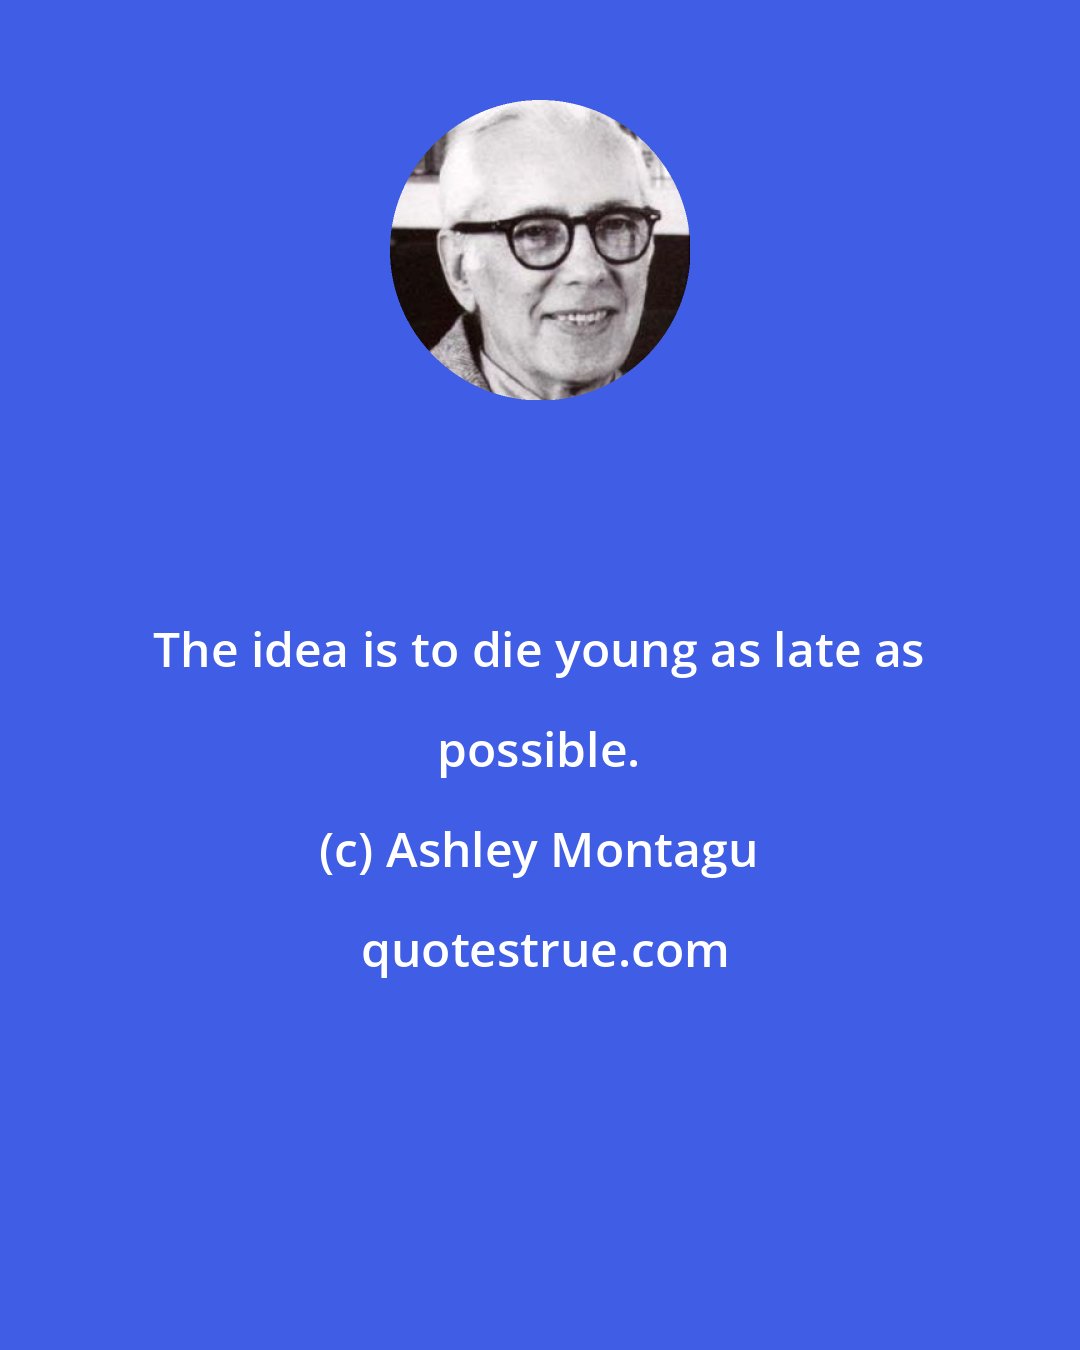 Ashley Montagu: The idea is to die young as late as possible.